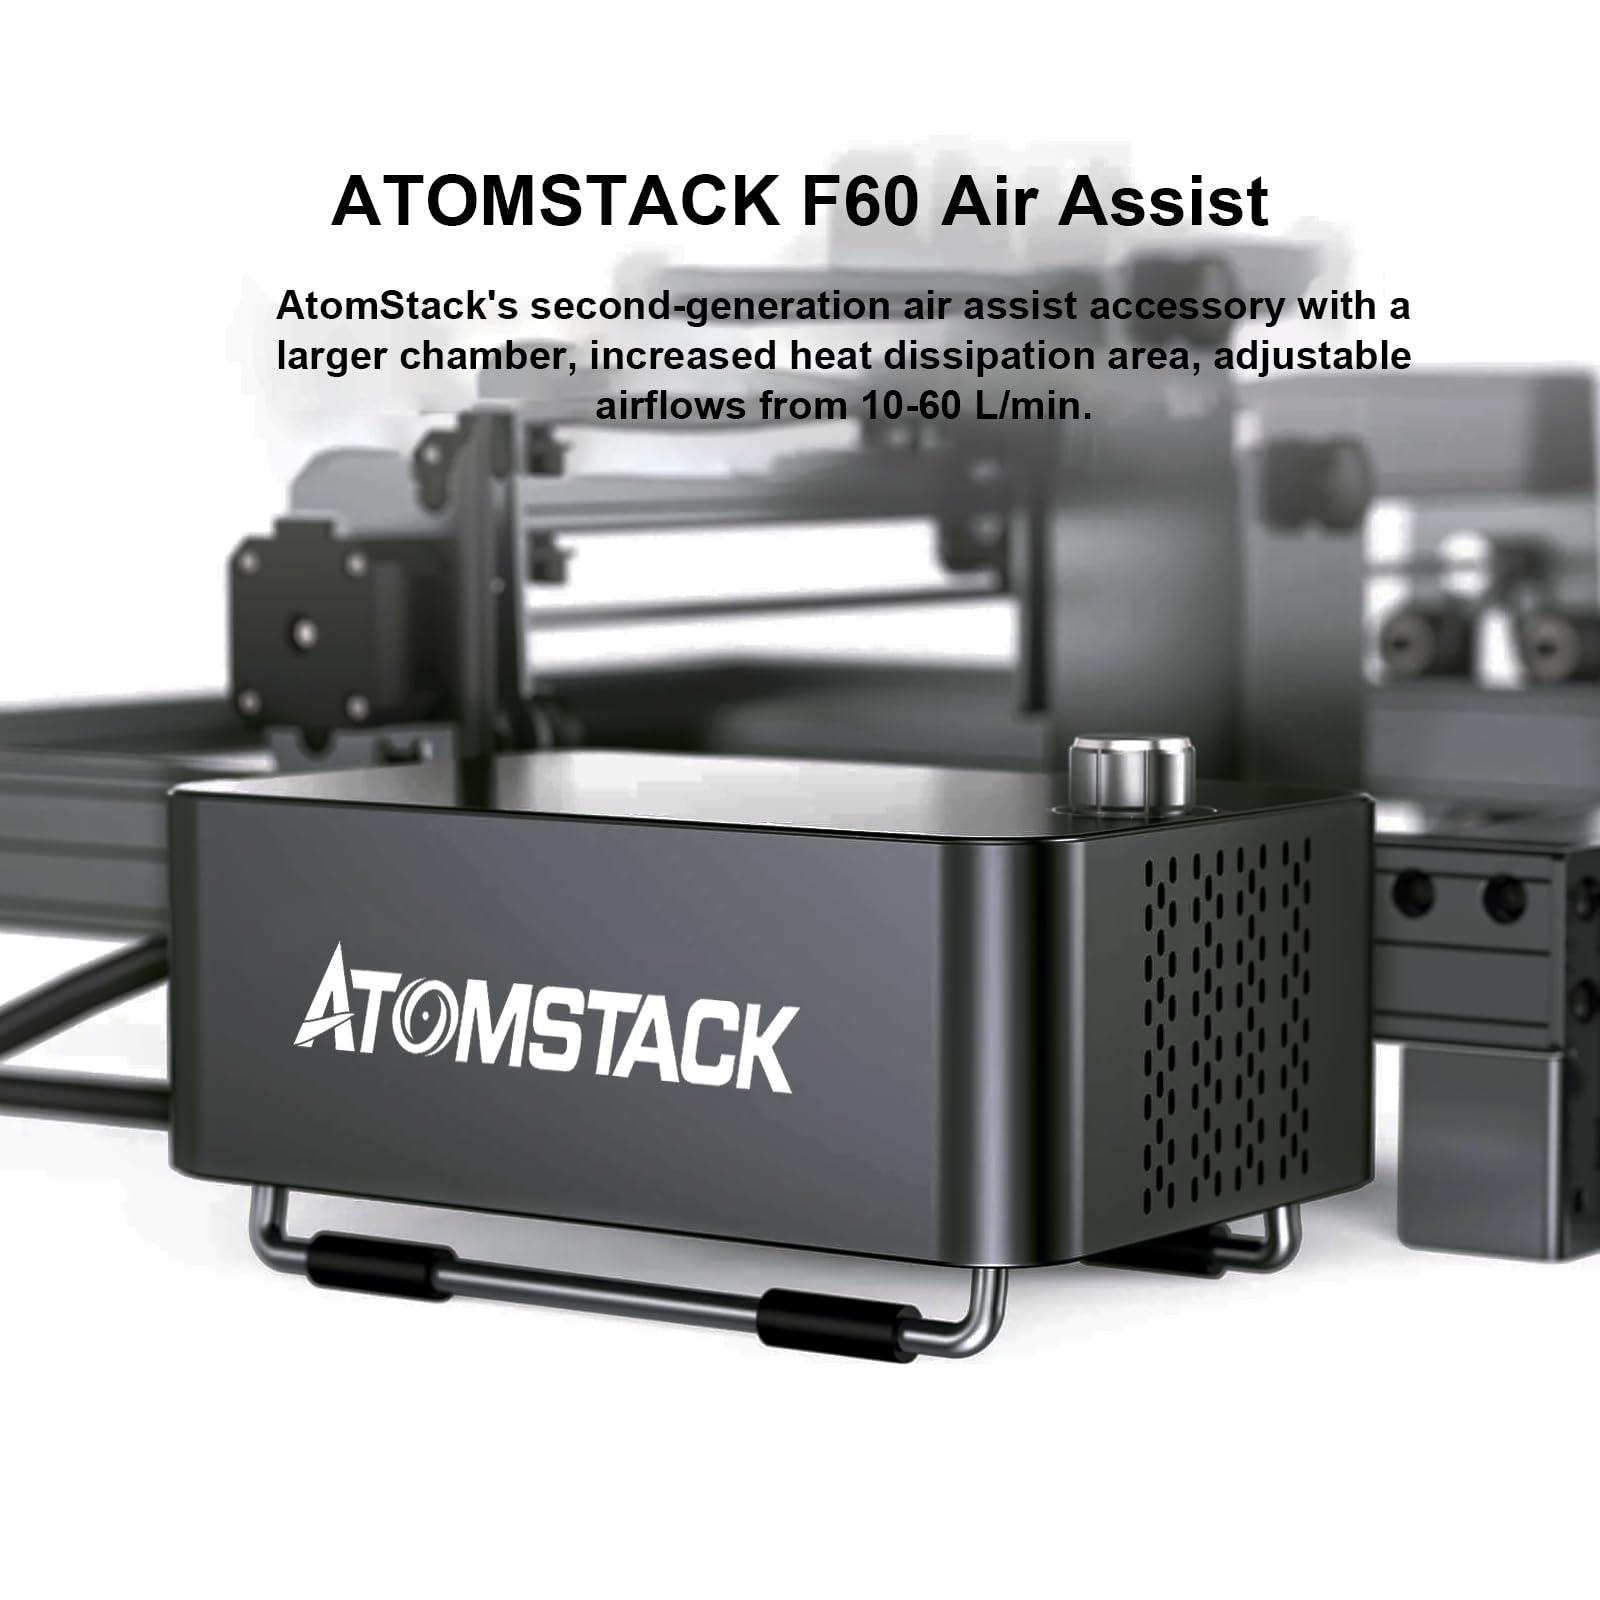 ATOMSTACK F60 Dual Pump Air Assist 10-60L/min, Automatic Switching Cleaner and Smoother Cutting Edge, Air Assist for A6 X6 A12 X12 A24 X24 Pro A20 A30 A40 A70 Series Laser Engraver Cutter